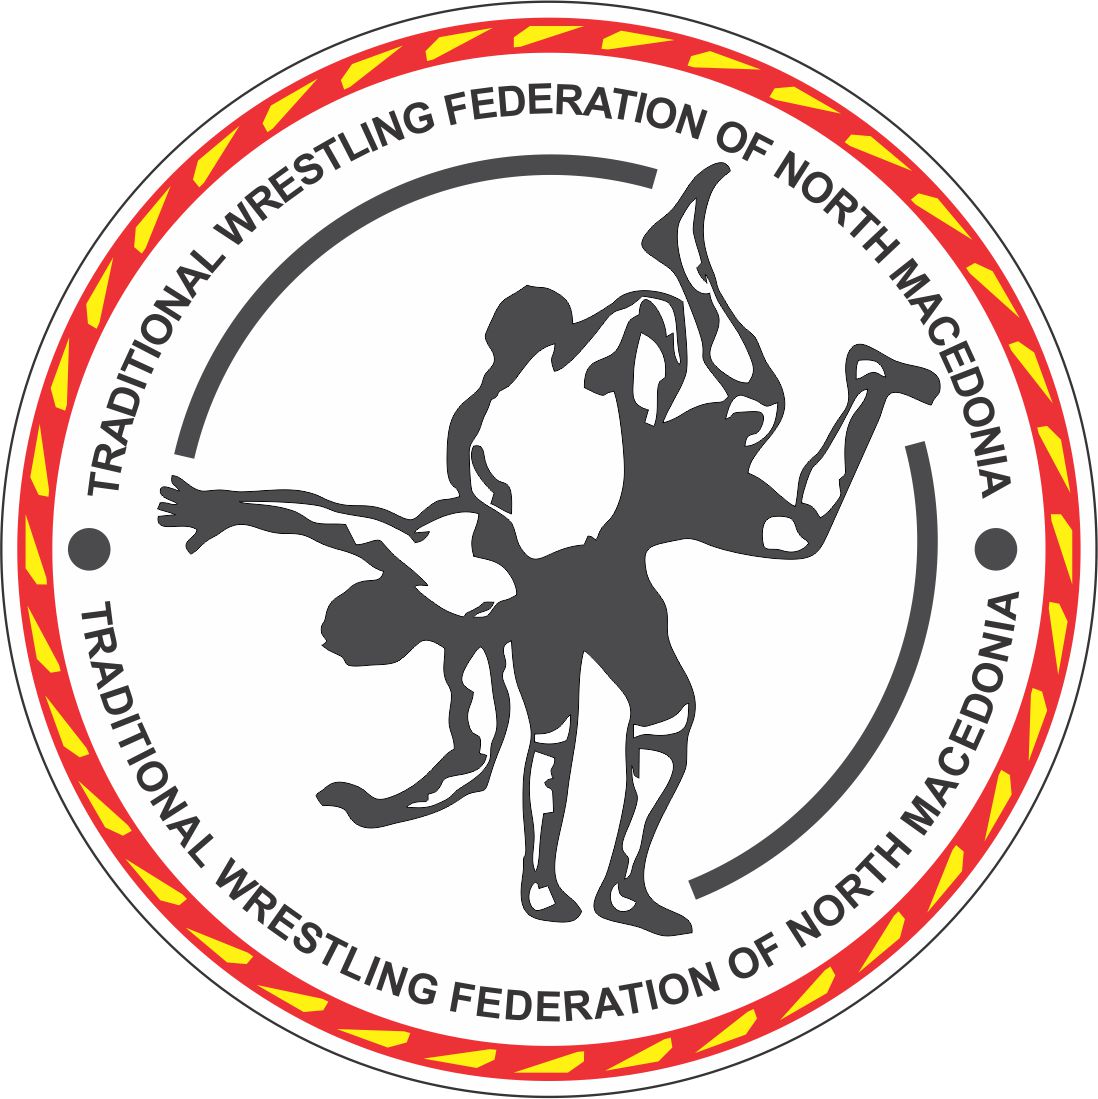 Traditional Wrestling Federation of North Macedonia